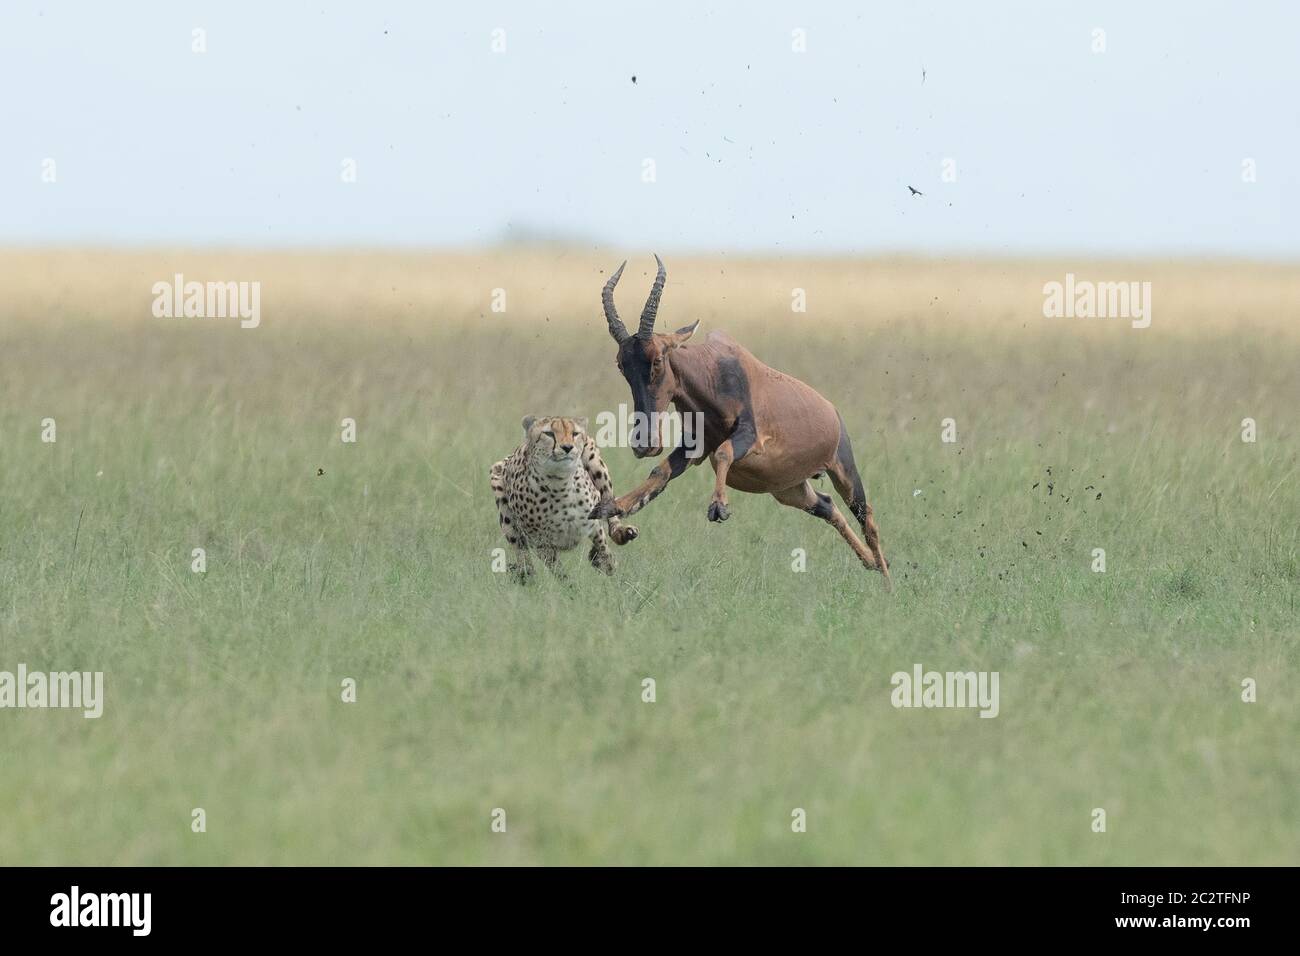 KENYA: In the sights of the world's fastest land mammal. AMAZING photos show a cheetah RIDING ON TOP of a galloping antelope in a frantic race for lif Stock Photo